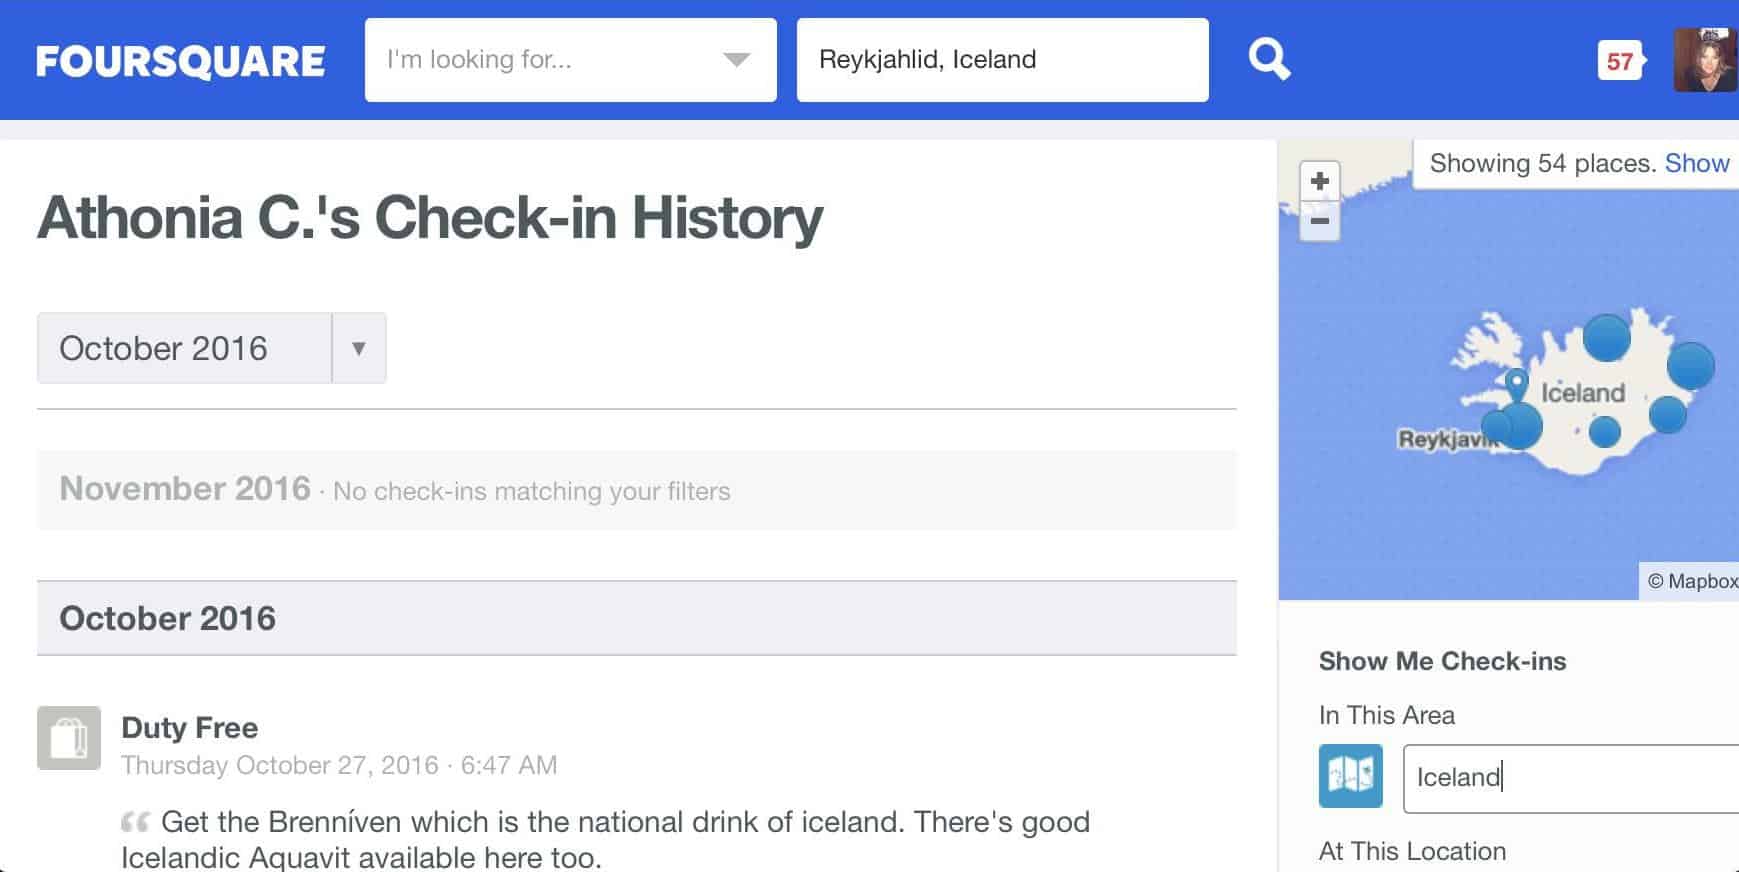 Iceland on Foursquare